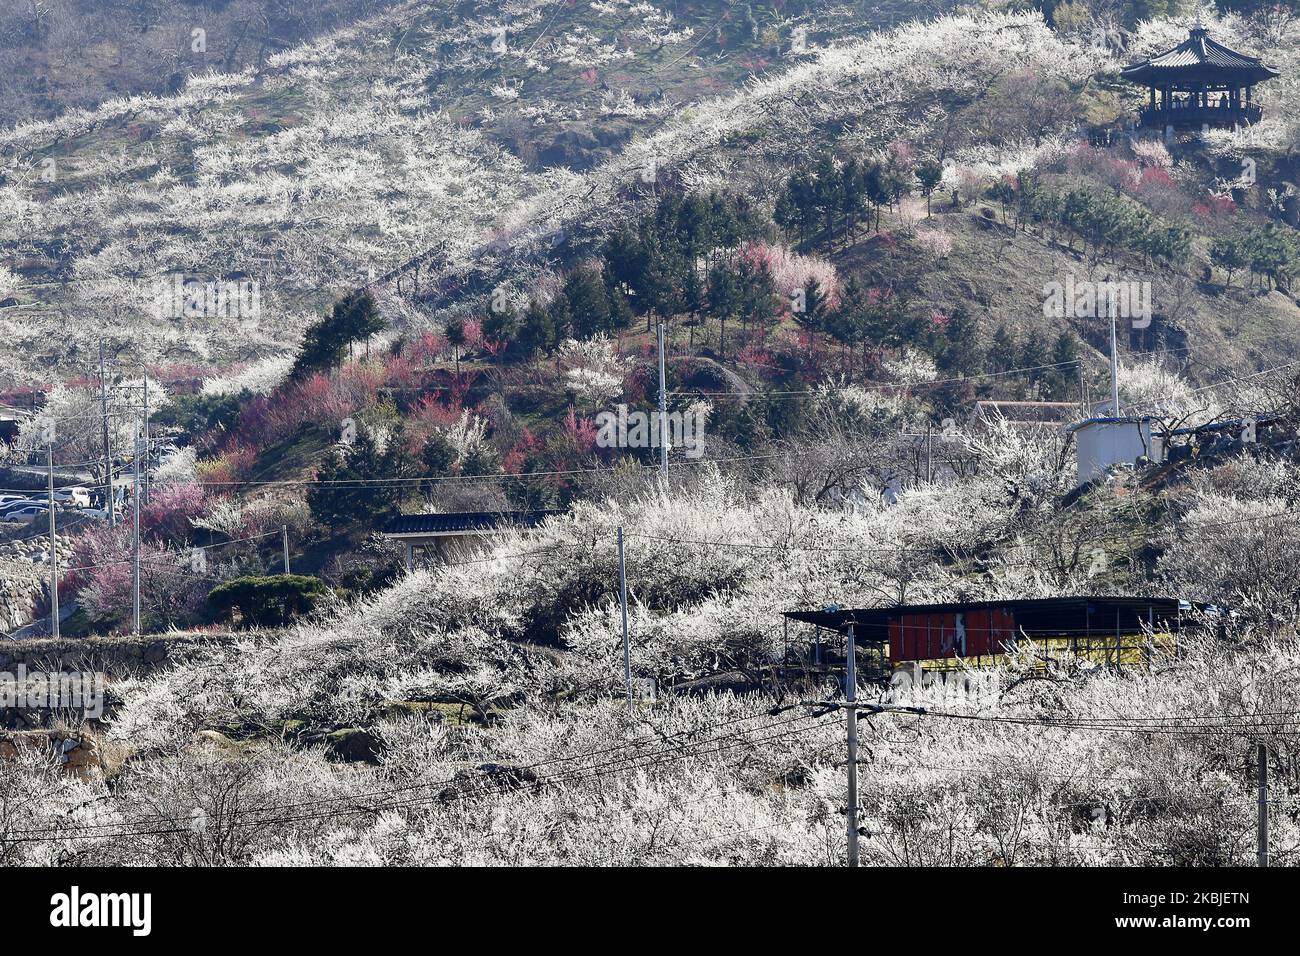 A Full Blooming plum blossoms at a village in Gwangyang, a town in South Korea's southwestern province of South Jeolla. The village, known as Plum Blossom Village, will hold a festival of the spring flower every March. But no hold event, because COVID19 this year. (Photo by Seung-il Ryu/NurPhoto) Stock Photo